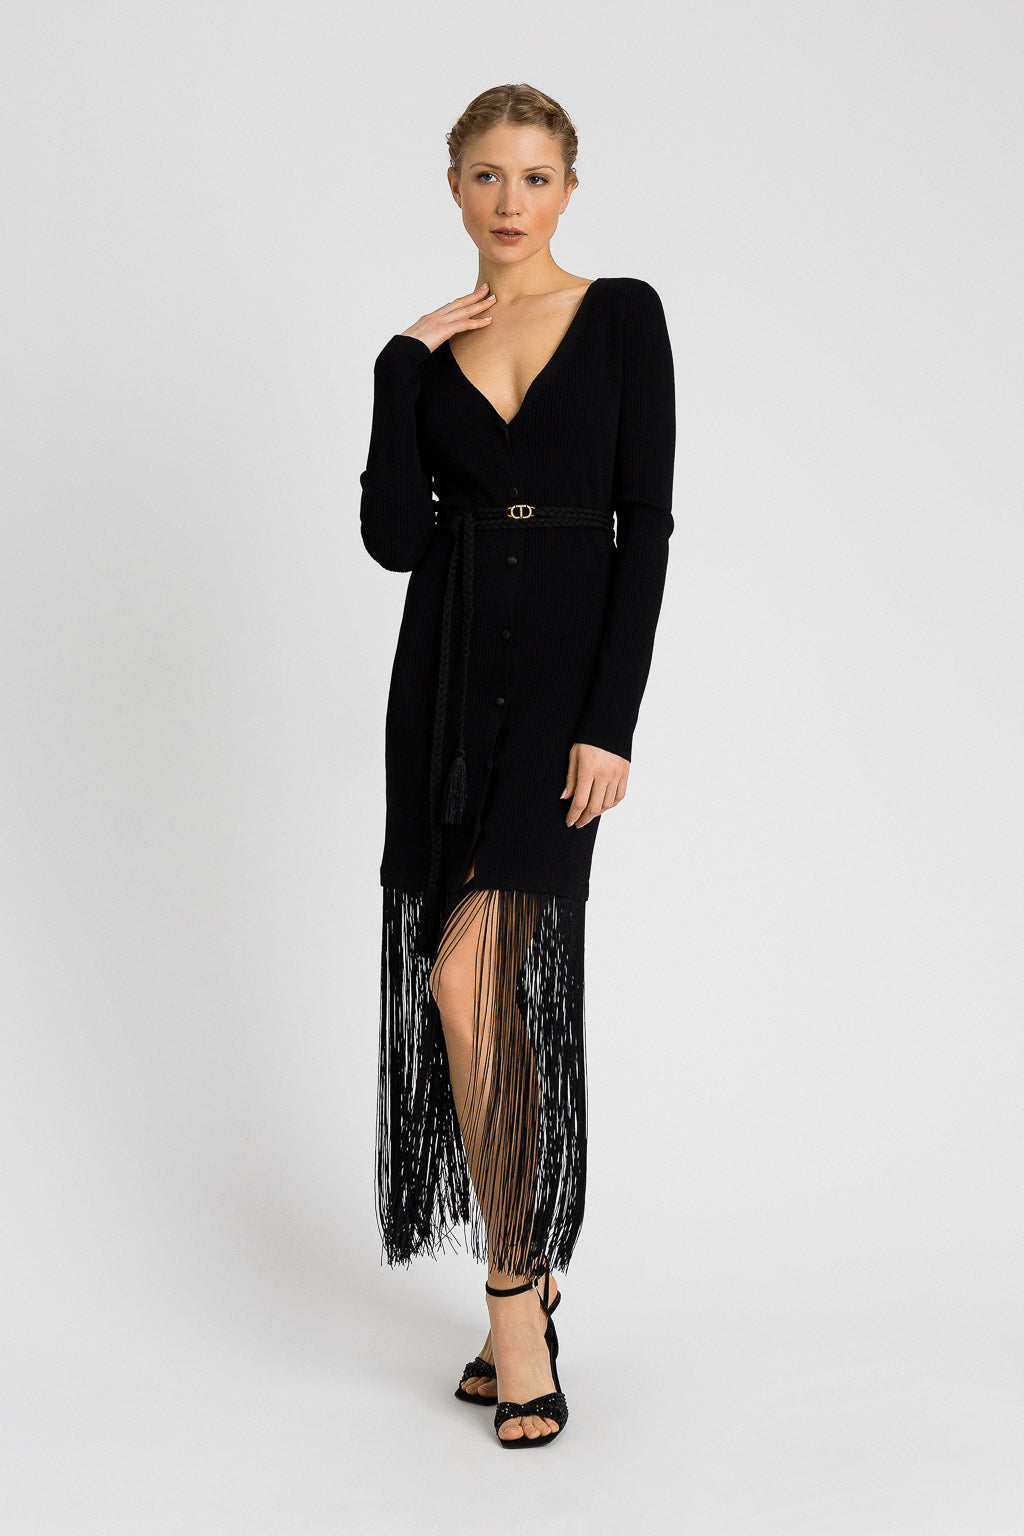 Twinset Black Knitted Dress